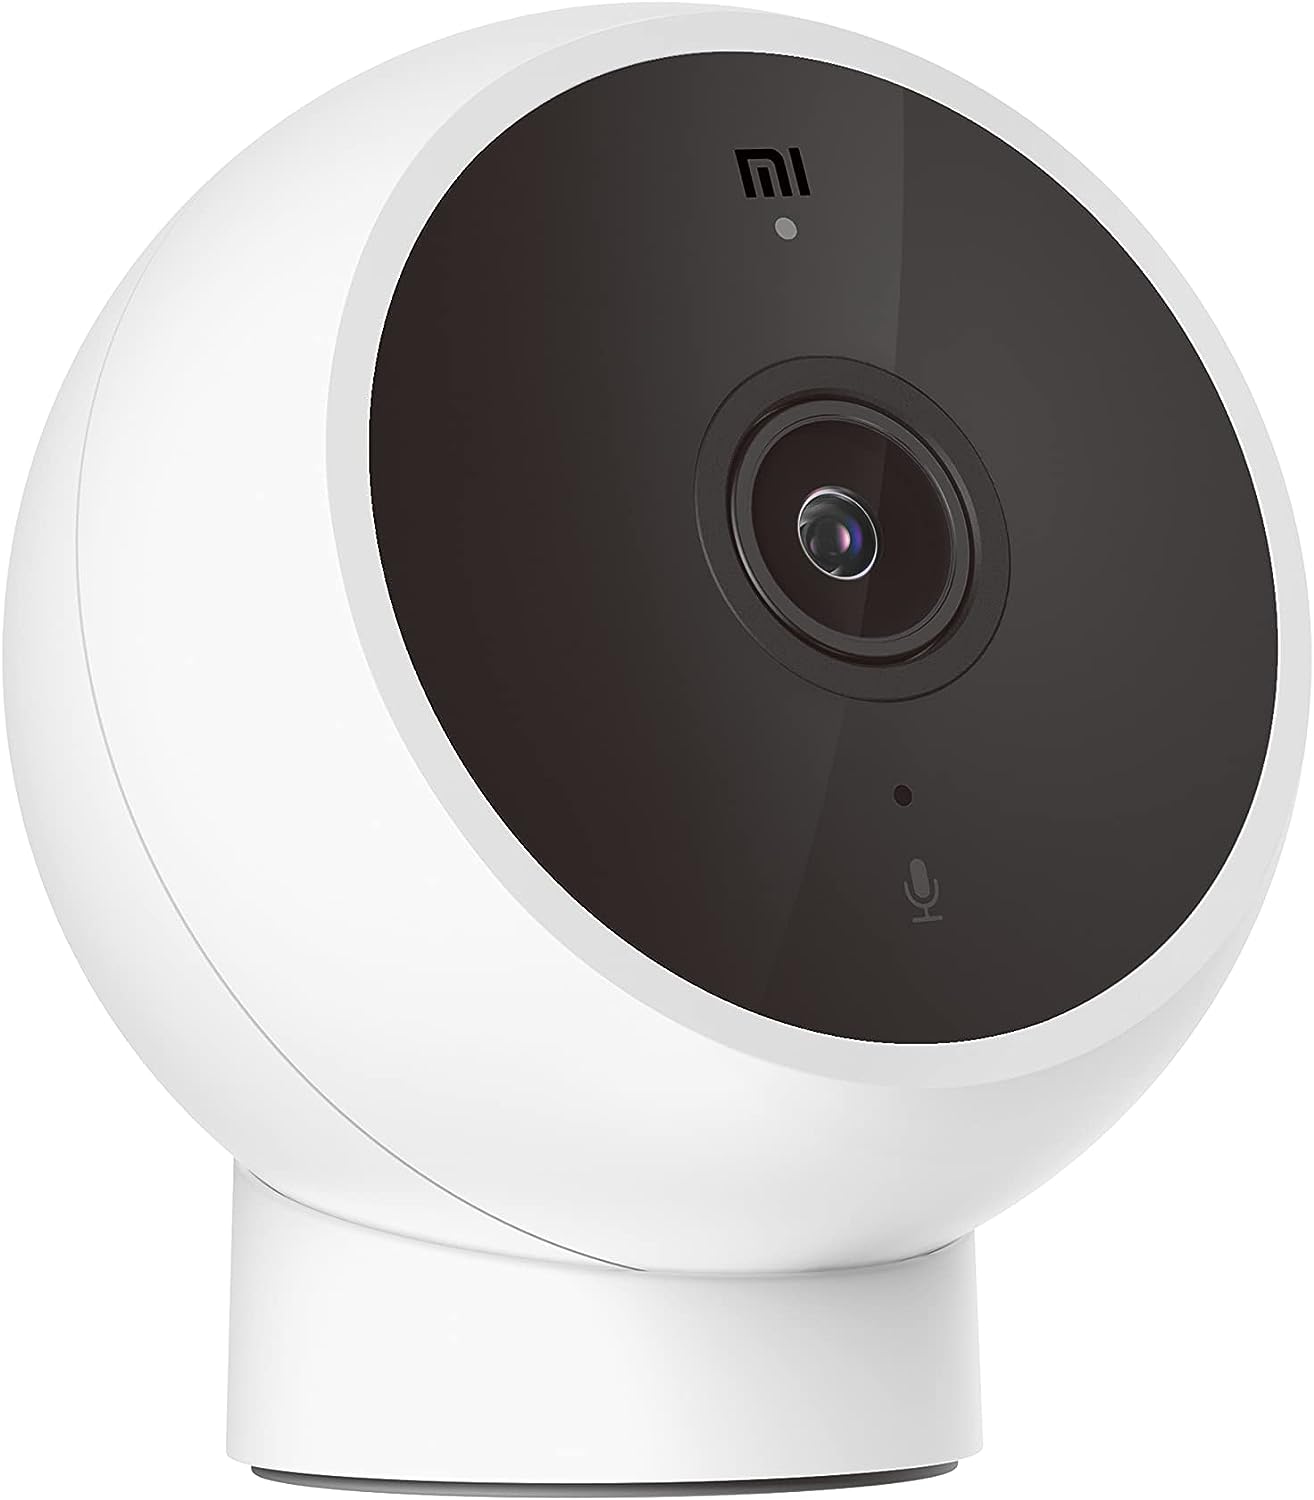 Xiaomi Mi Home Security Camera 2K - Magnetic Mount| 180° Rotating Magnetic Mount |Infrared Night Vision | Two-Way Voice Calls | Motion Detection